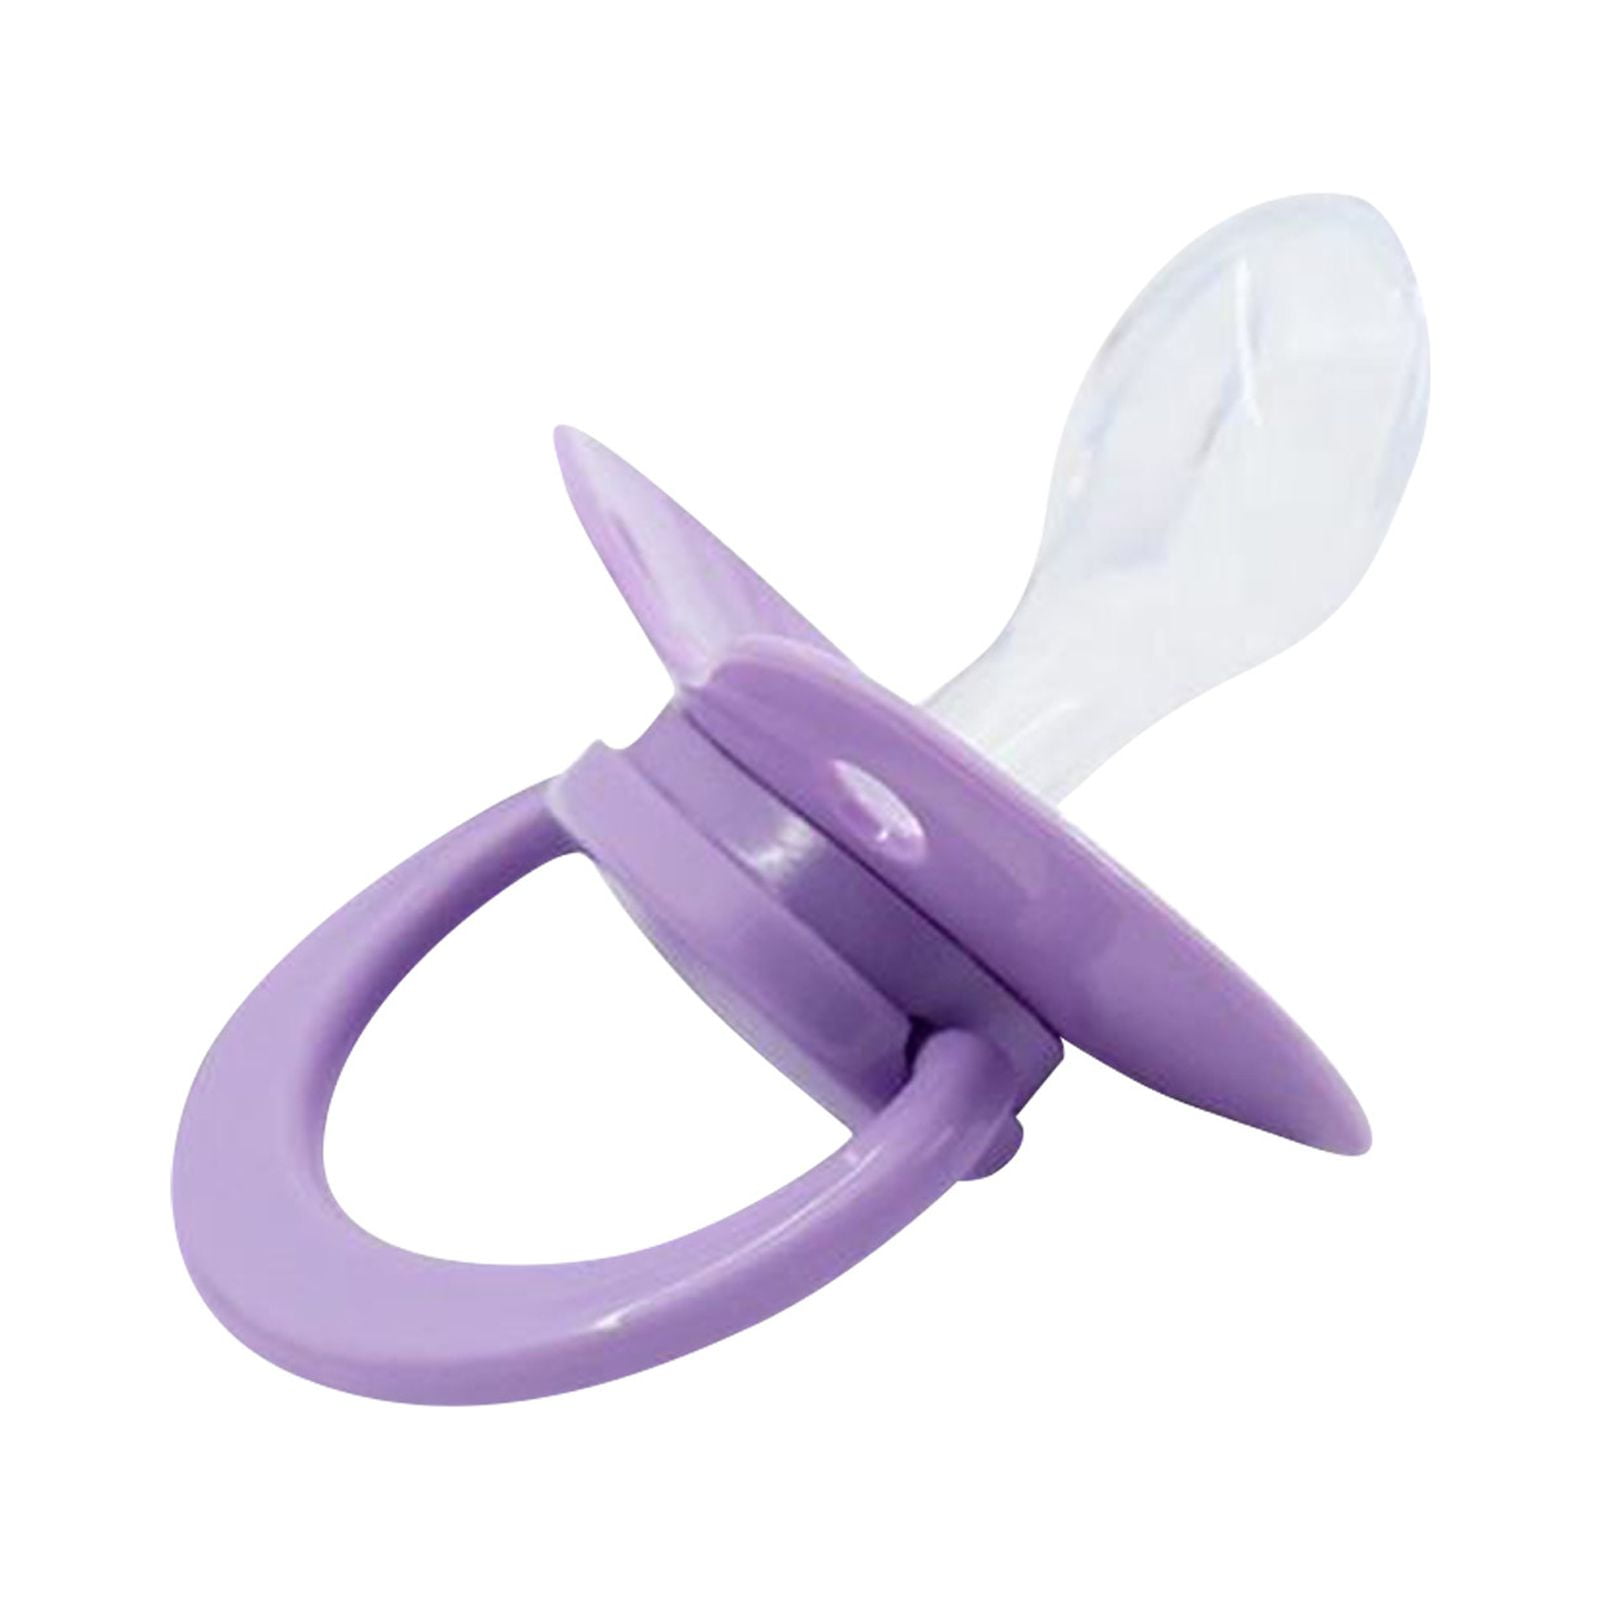 Adult Pacifier Size Dummy for Adult Baby Silicone Pacifier